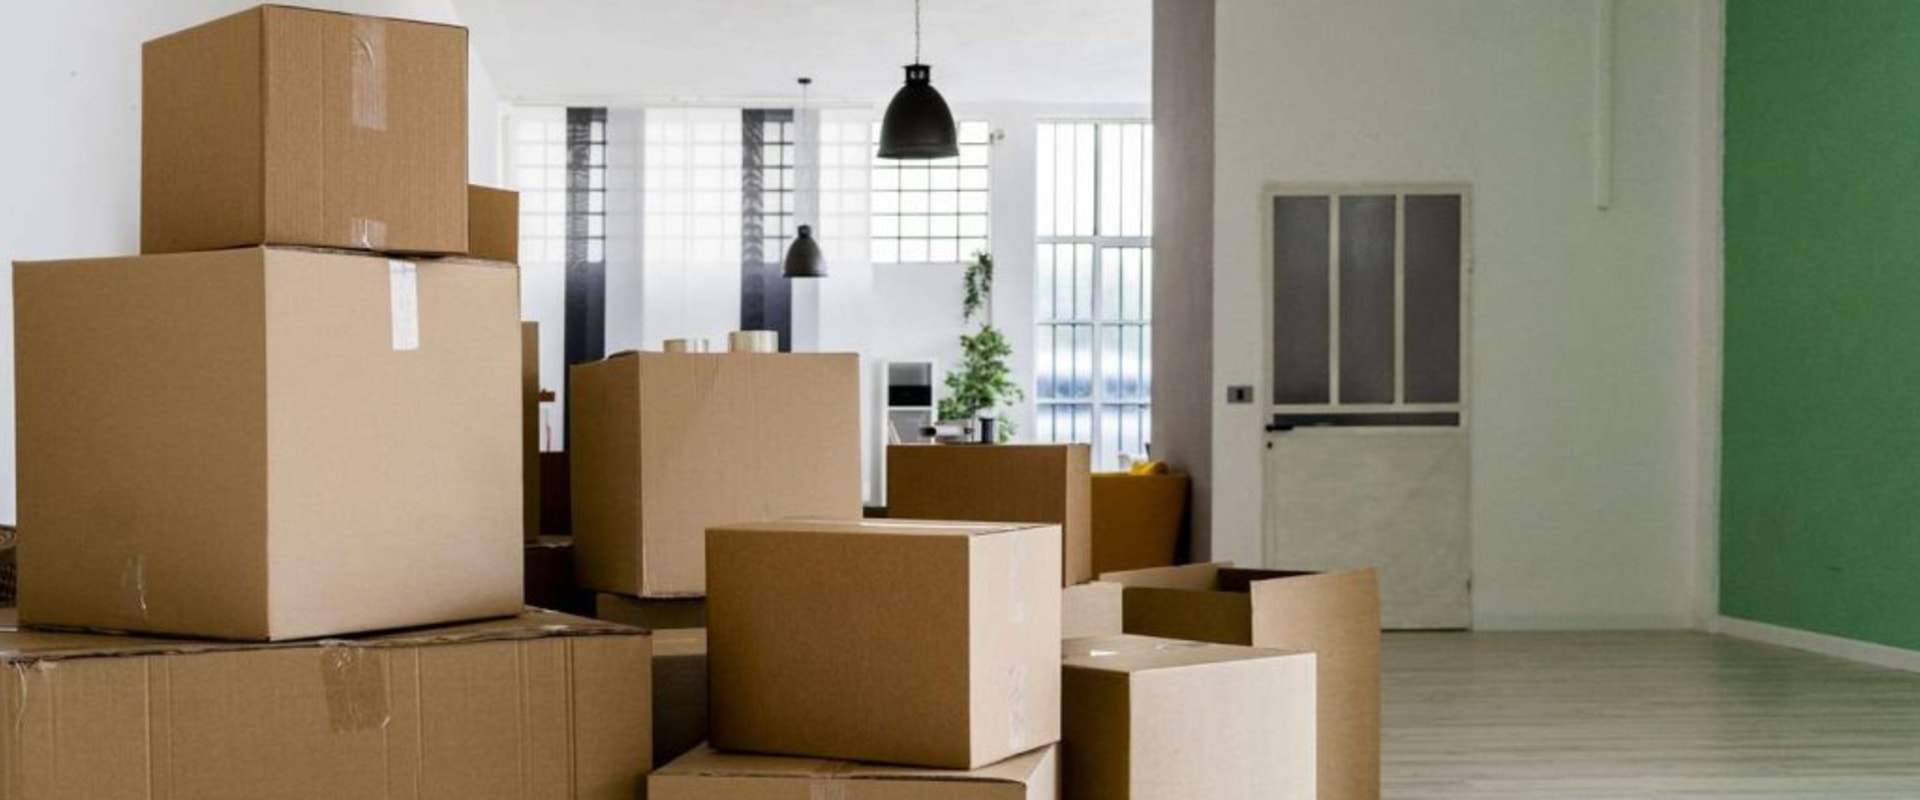 What to Expect During a Local Move: A Comprehensive Guide to Making Your Move Smooth and Stress-Free